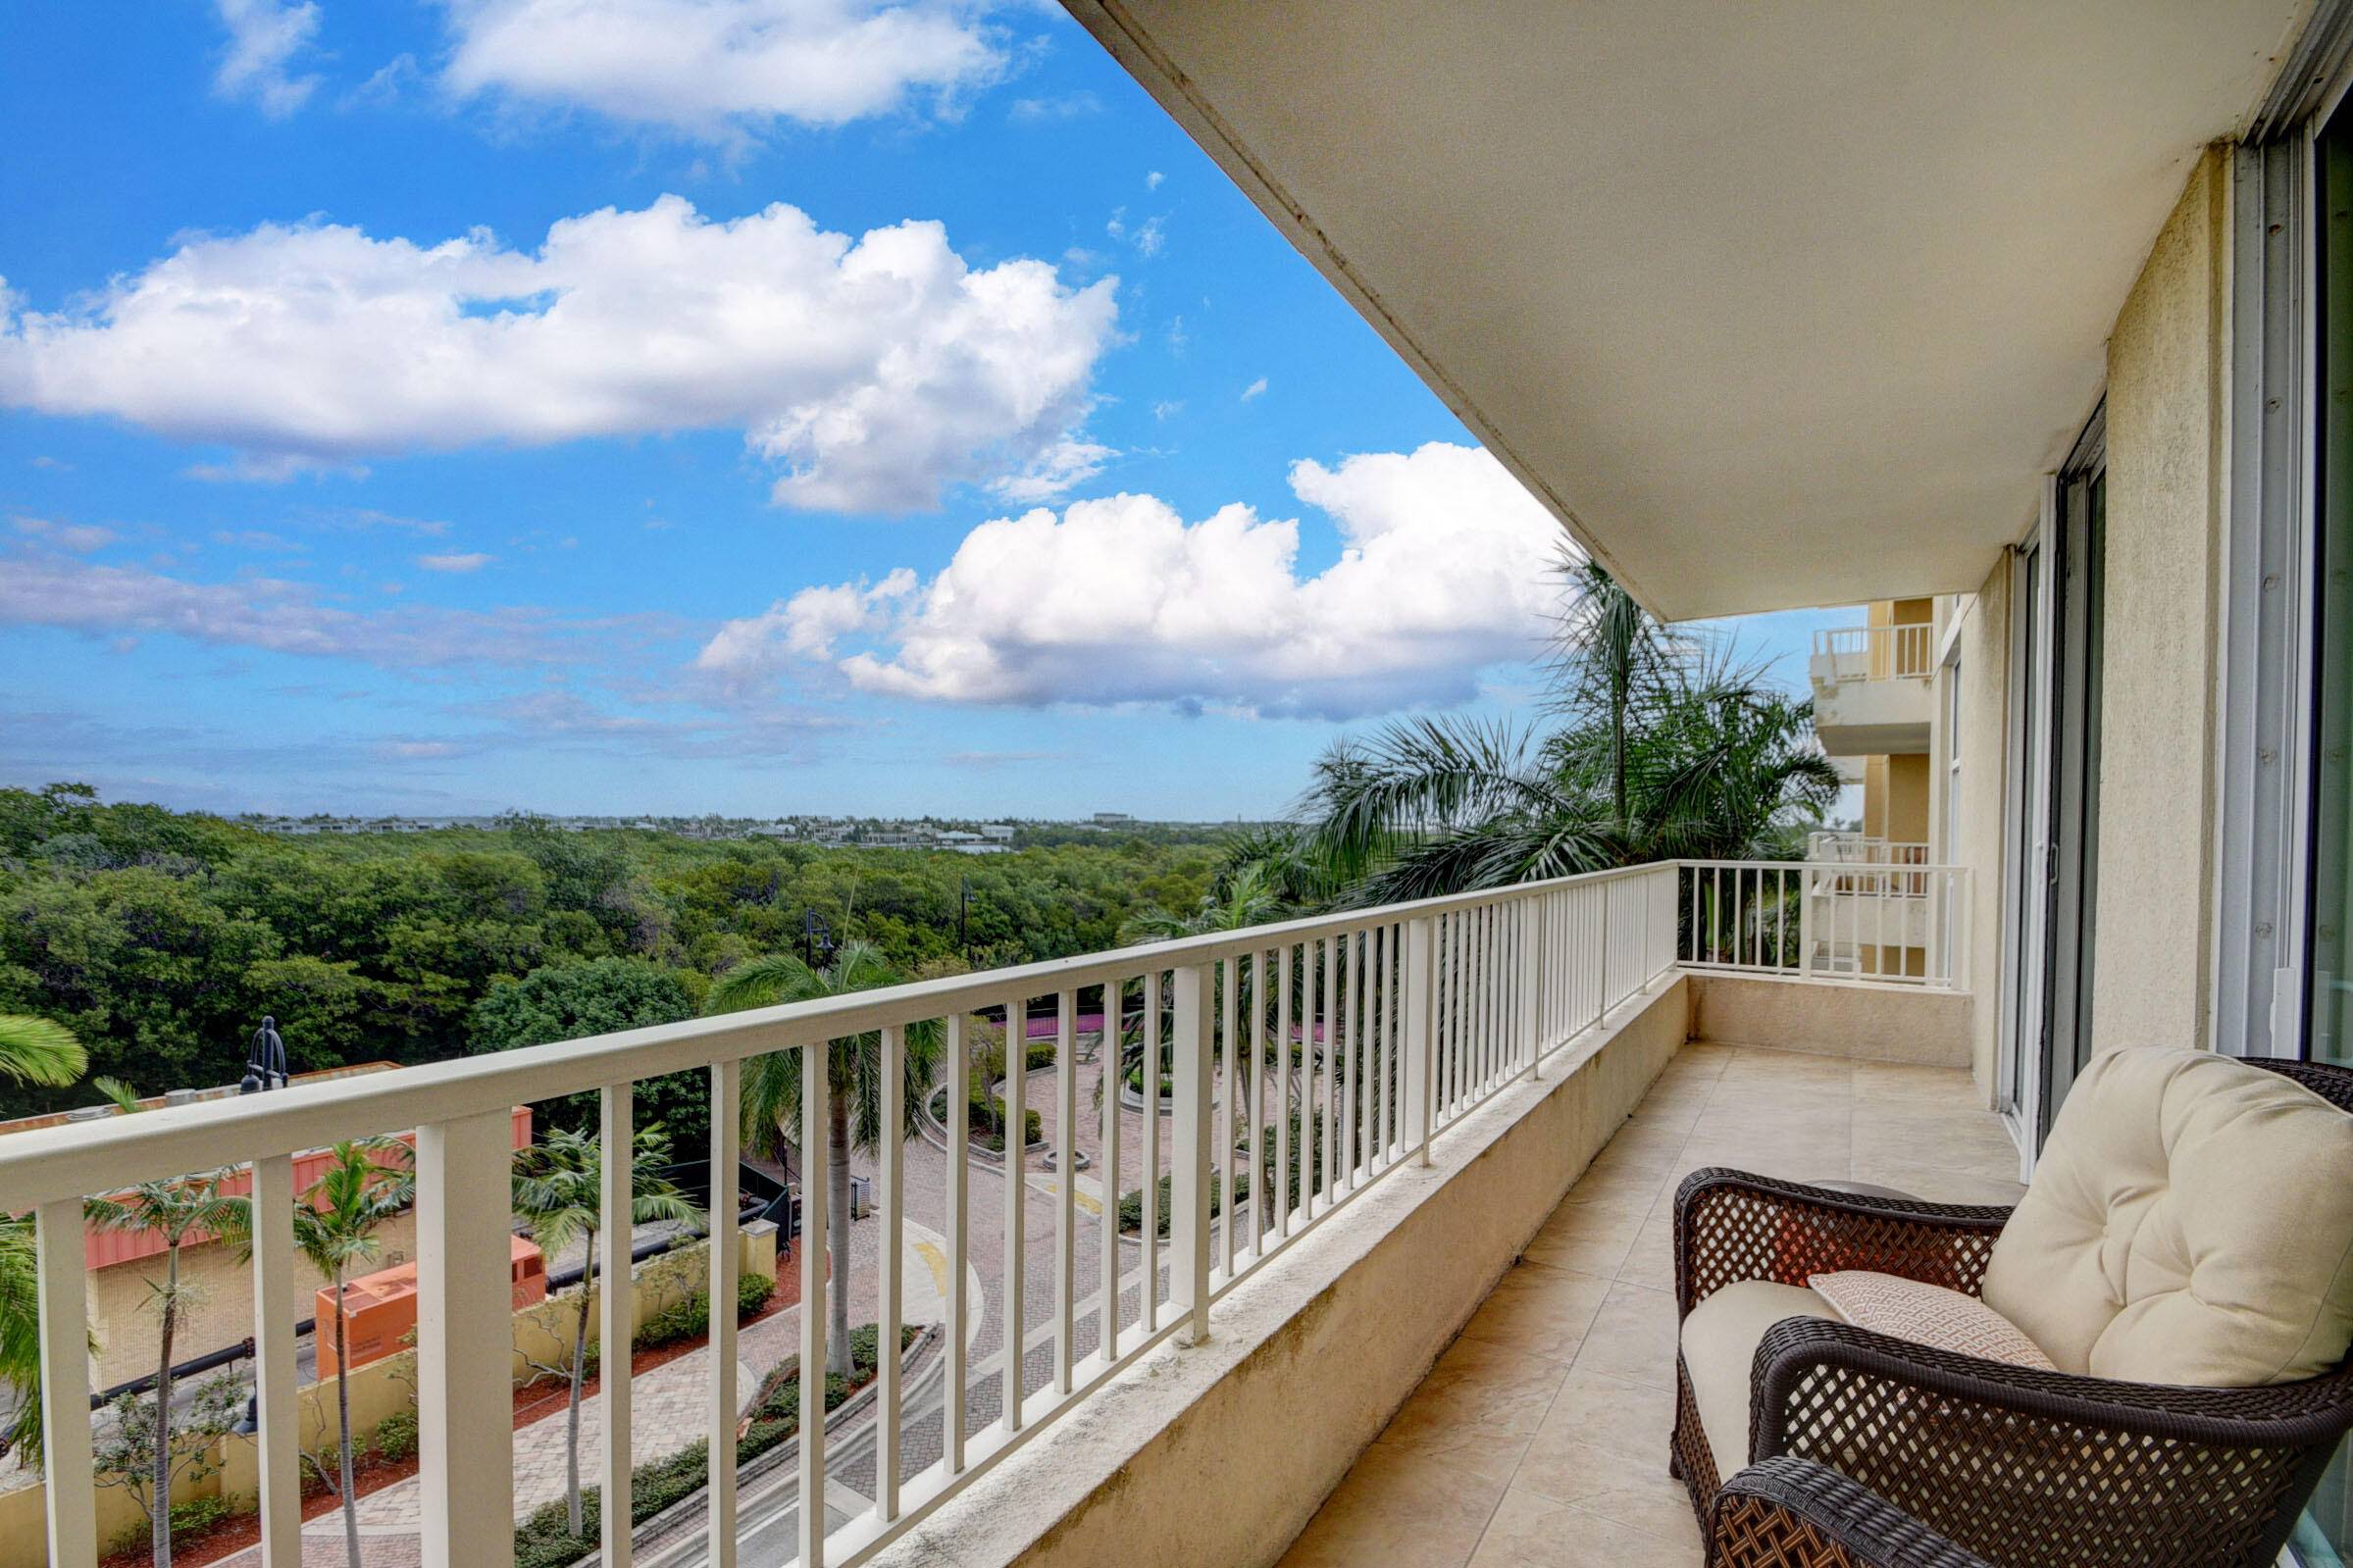 Price Reduction ! ! Intracoastal living, with balcony and window views of the lagoon and Intracoastal for you or your tenants to enjoy.